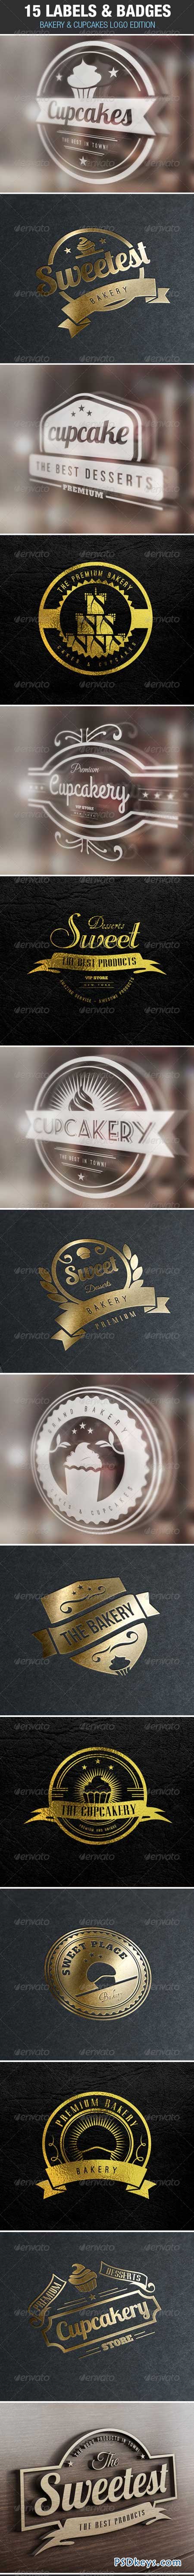 15 Bakery Cupcakes and Cakes Labels & Badges Logos 6971691